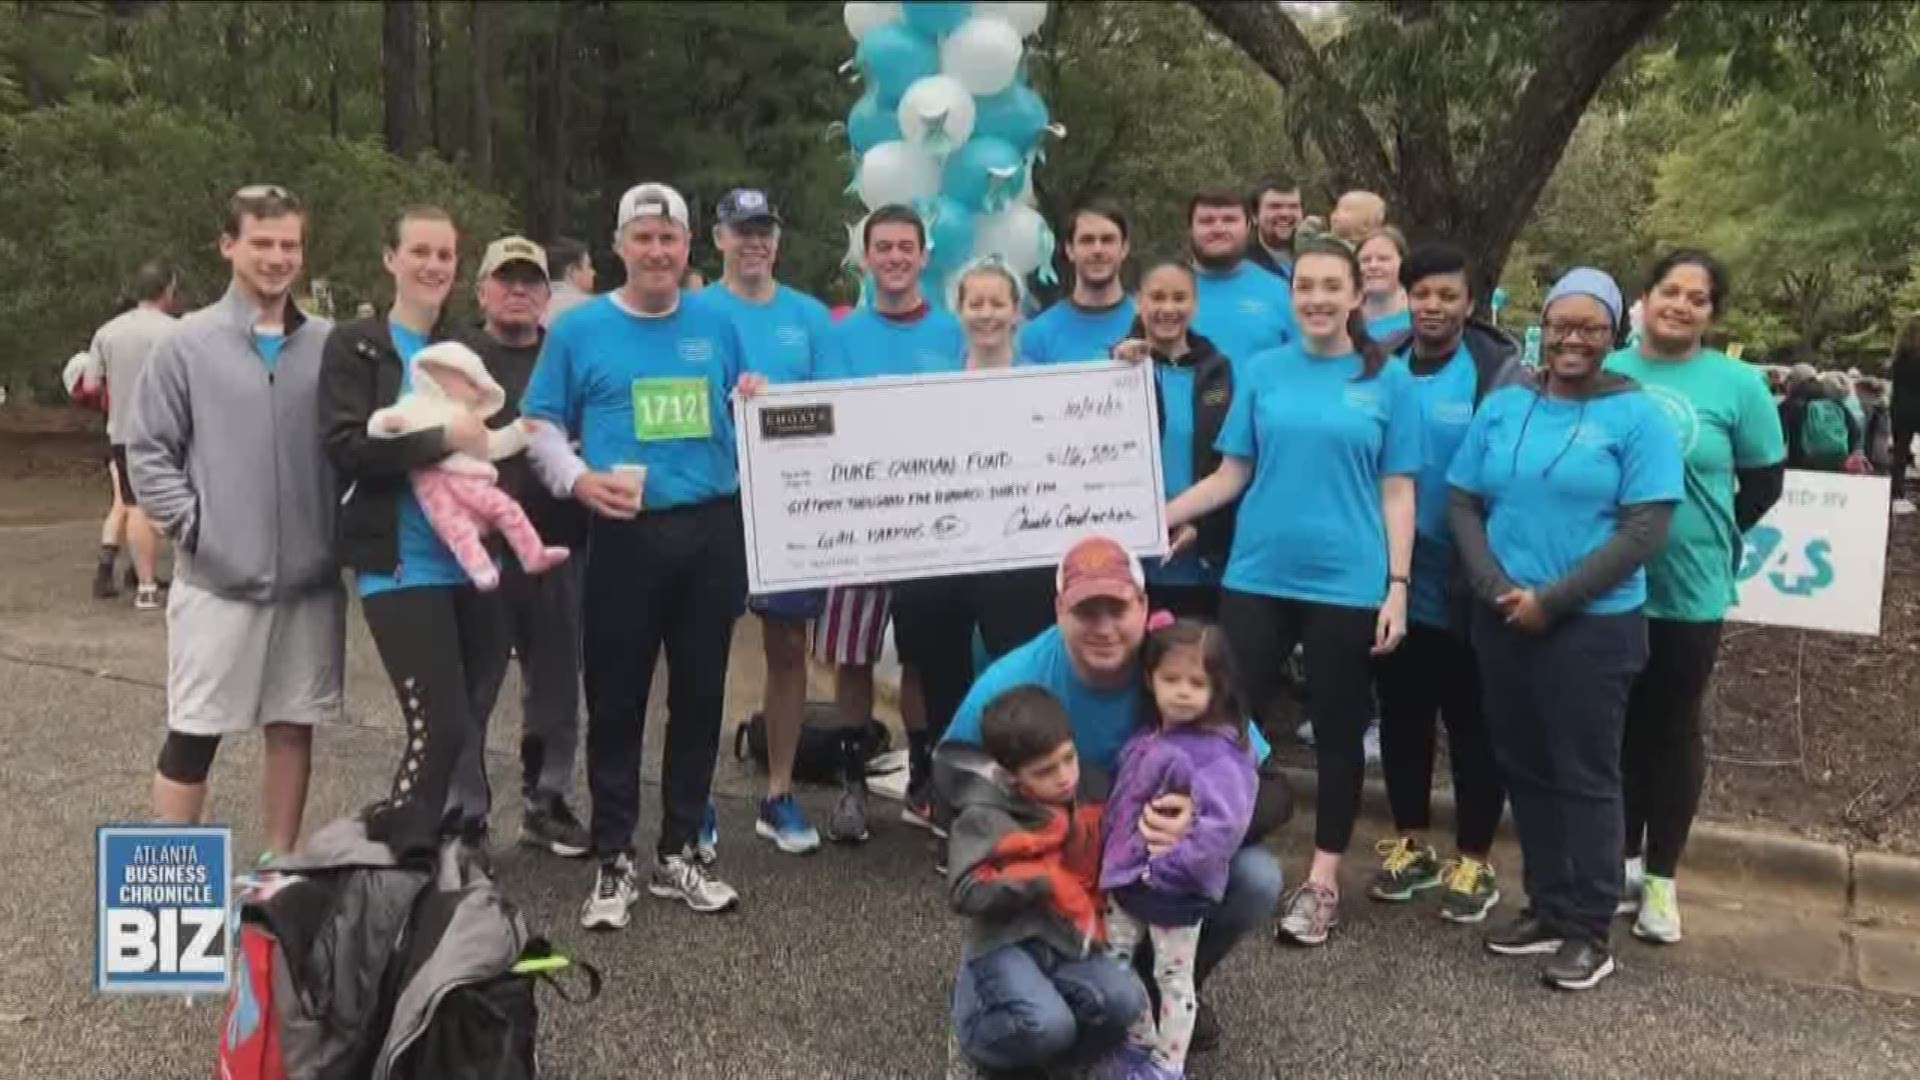 See how Choate Construction gives back to our community on The Extra Mile, brought to you by goBeyondProfit.